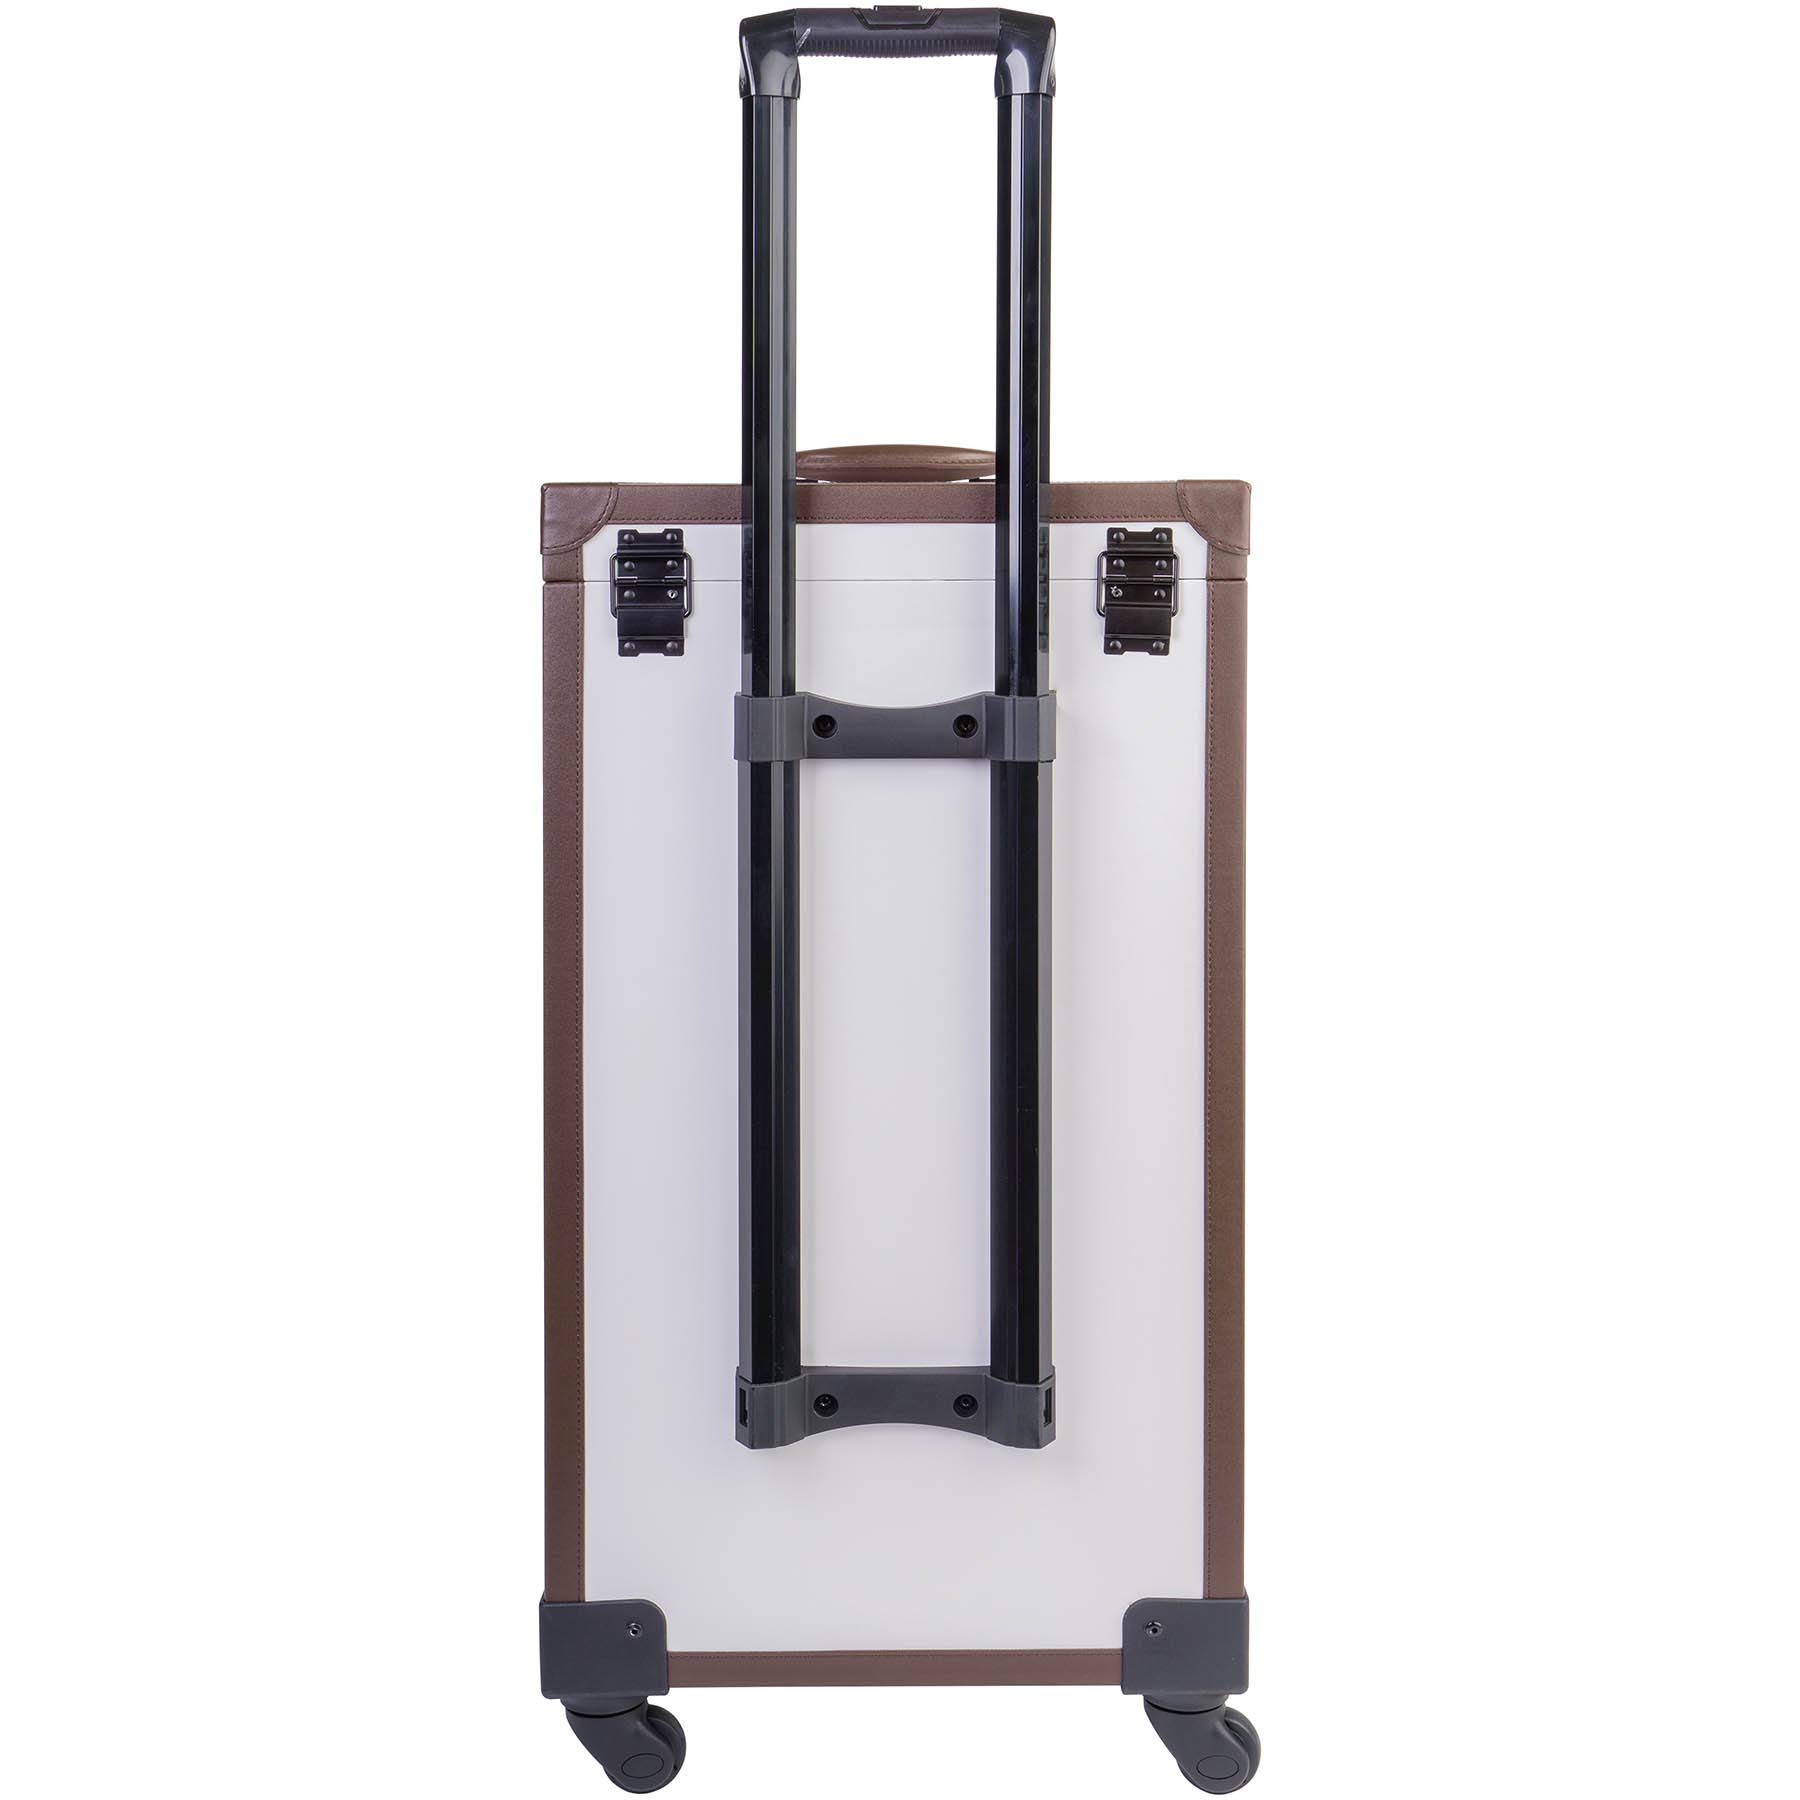 SHANY REBEL Series – Pro Makeup Artists Multifunction Cosmetics Trolley Train Case – Large - White Collar